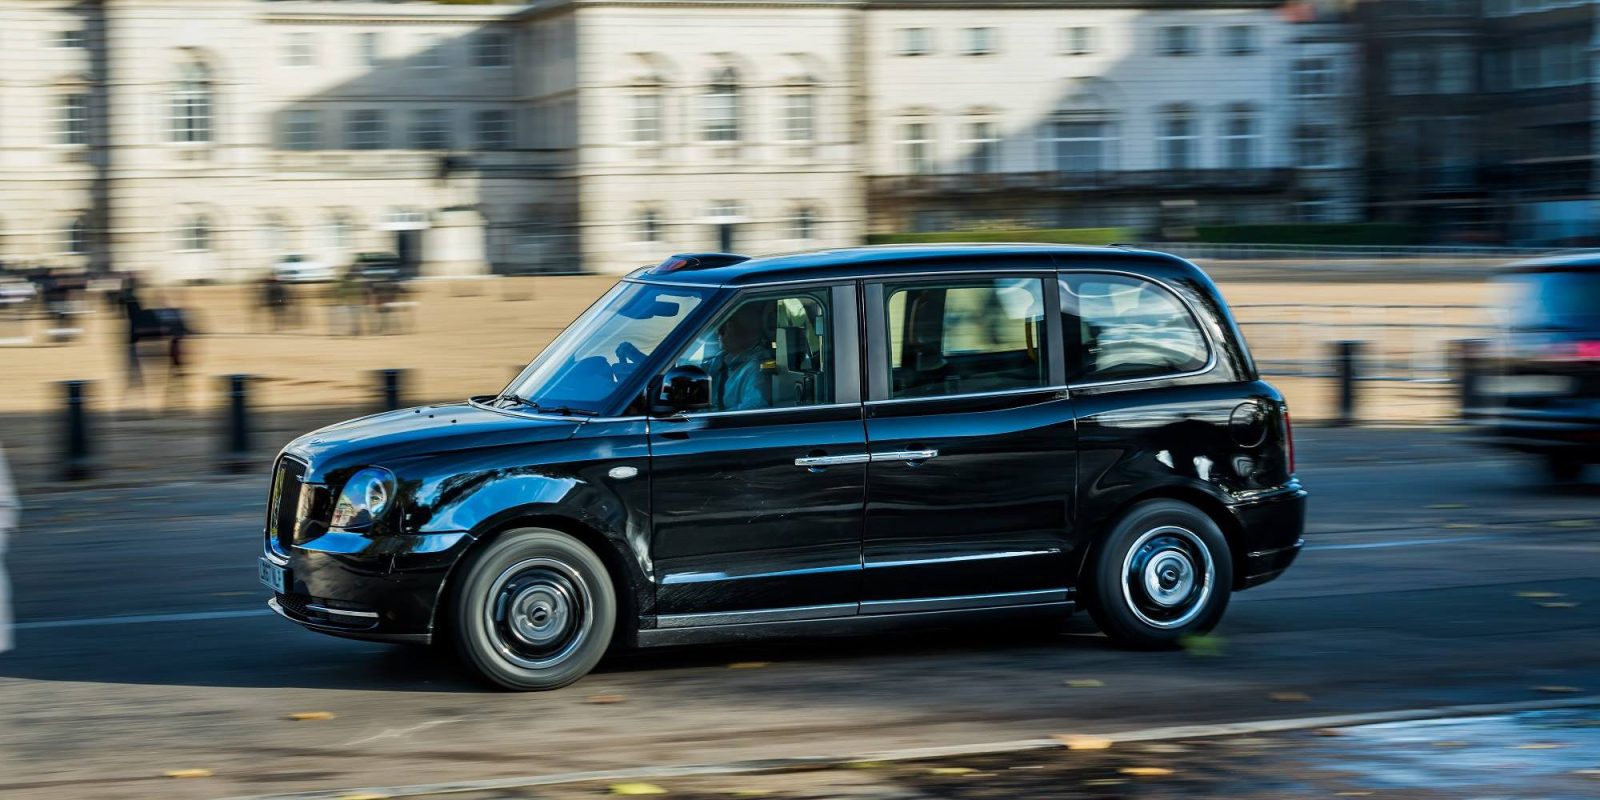 London's new electric black cabs hit the road - a classic reborn - Electrek1600 x 800